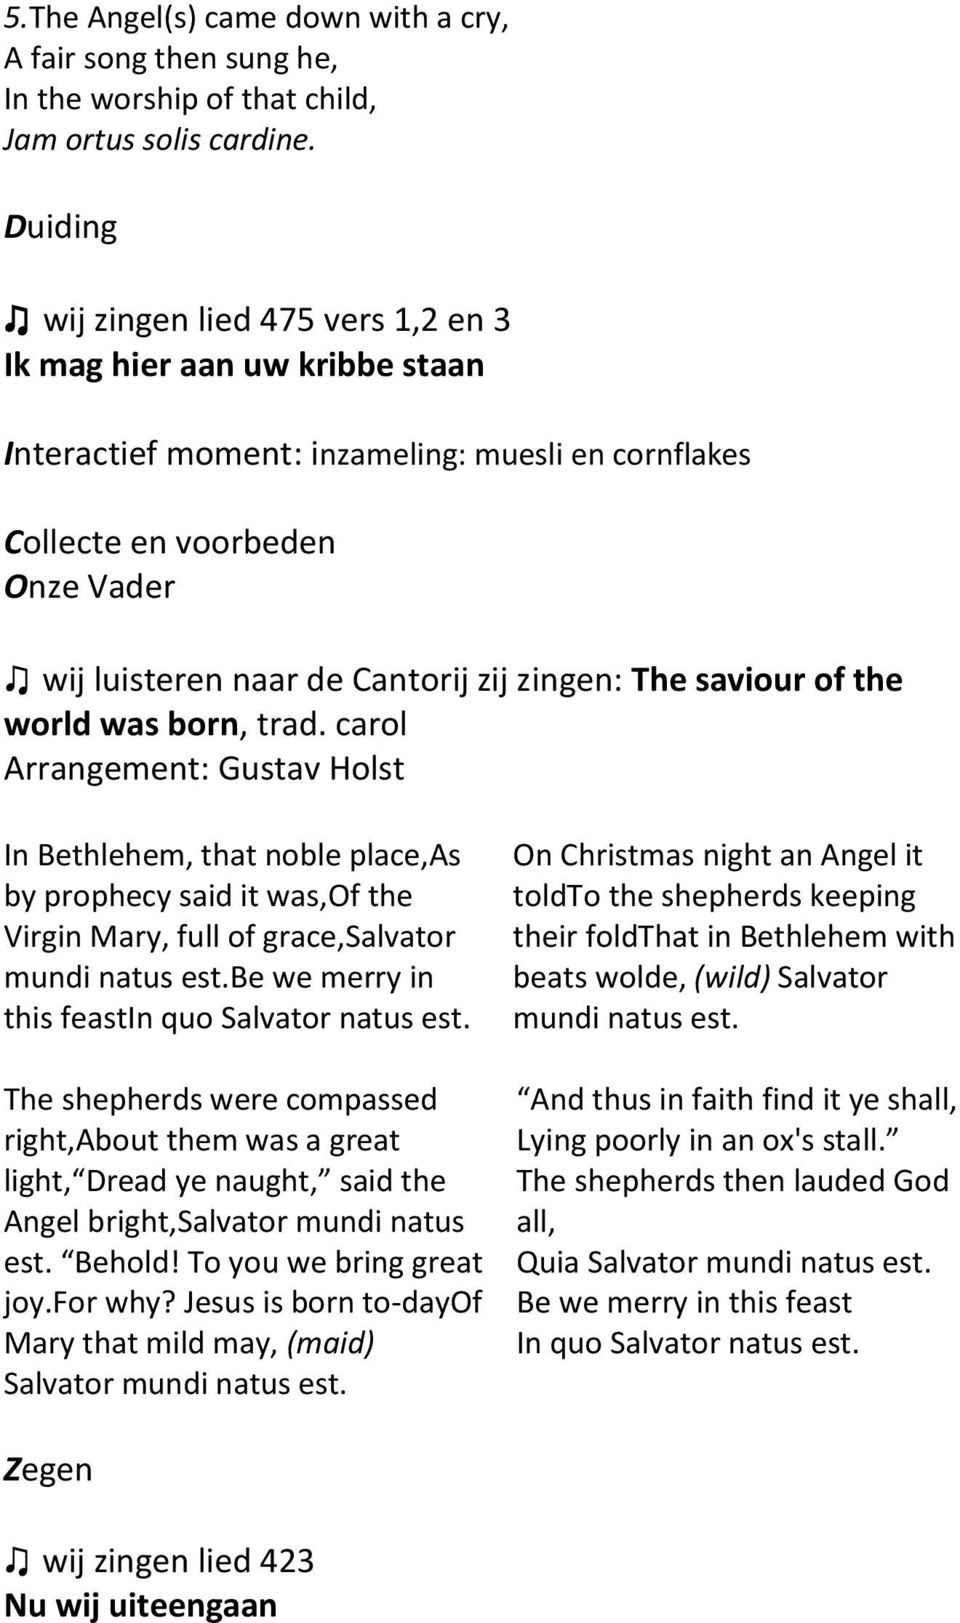 zingen: The saviour of the world was born, trad. carol Arrangement: Gustav Holst In Bethlehem, that noble place,as by prophecy said it was,of the Virgin Mary, full of grace,salvator mundi natus est.